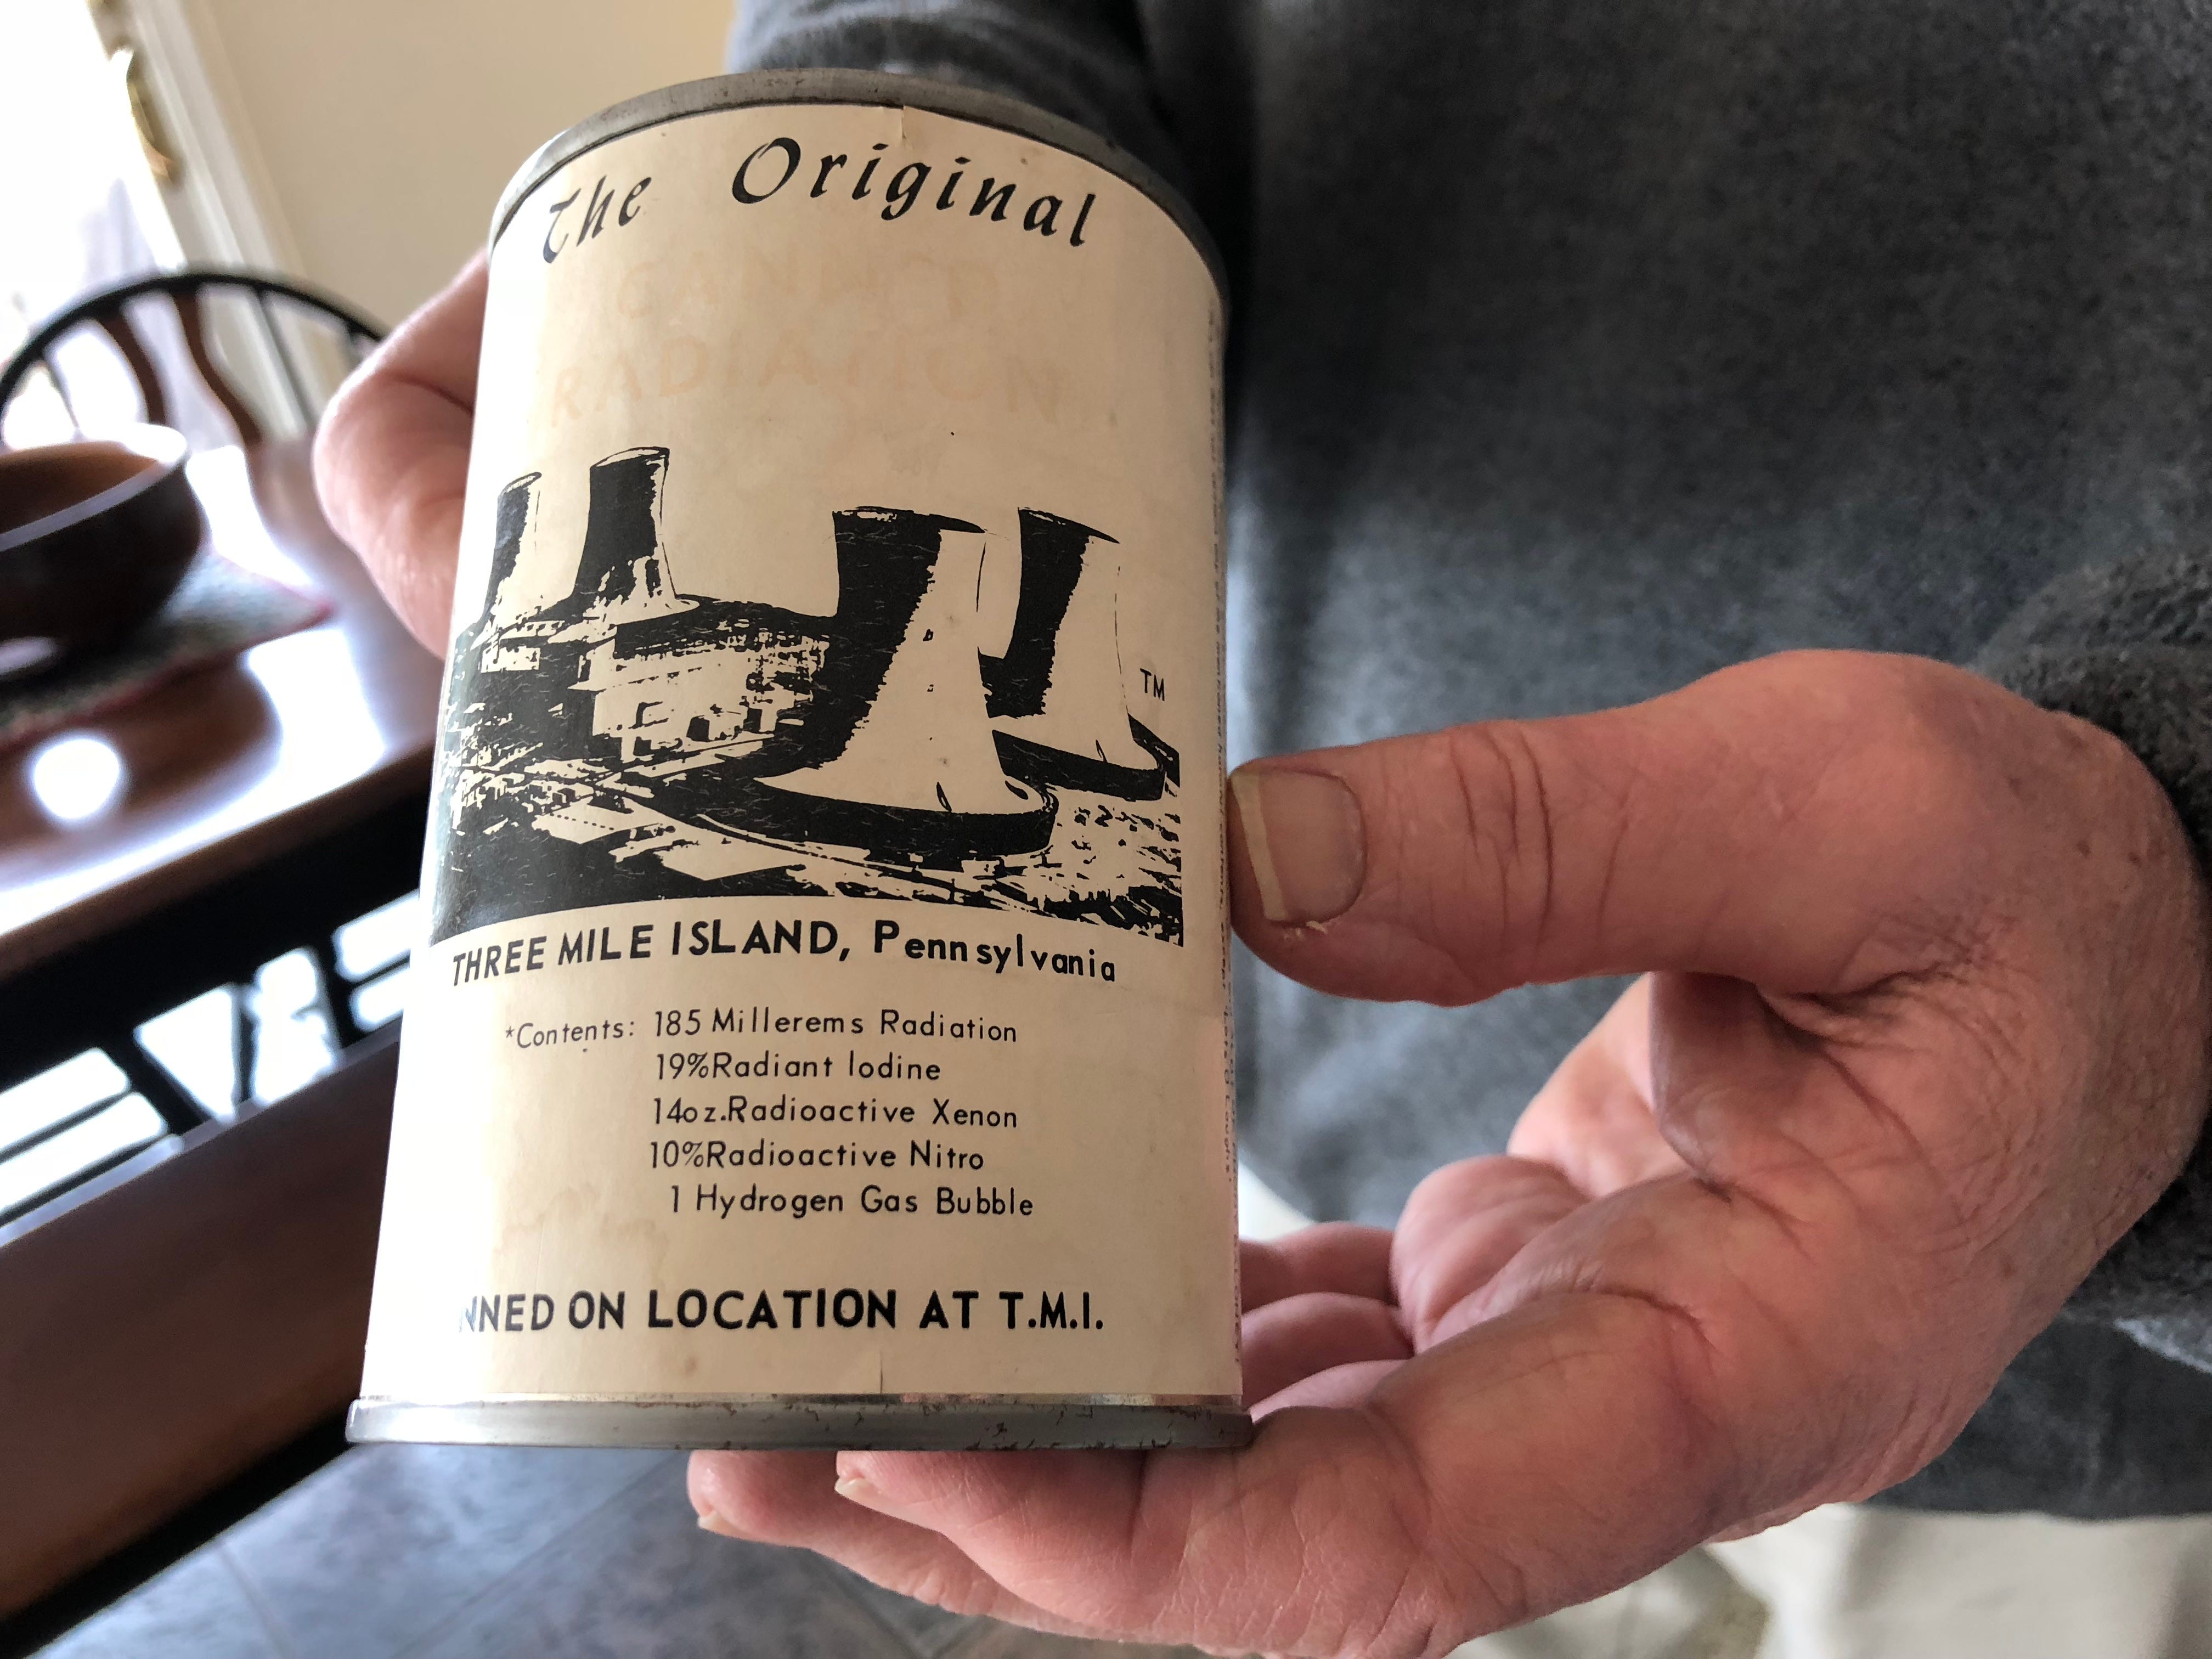 Kevin Molloy, former Dauphin County Civil Defense/Communications Director, was among the first to respond following the 1979 nuclear accident at TMI-2.

He shows an example of a gag gift created following the accident — radioactive air "canned on location at TMI." — Wednesday, March 13, 2019. (Photo by: Lindsay C. VanAsdalan)